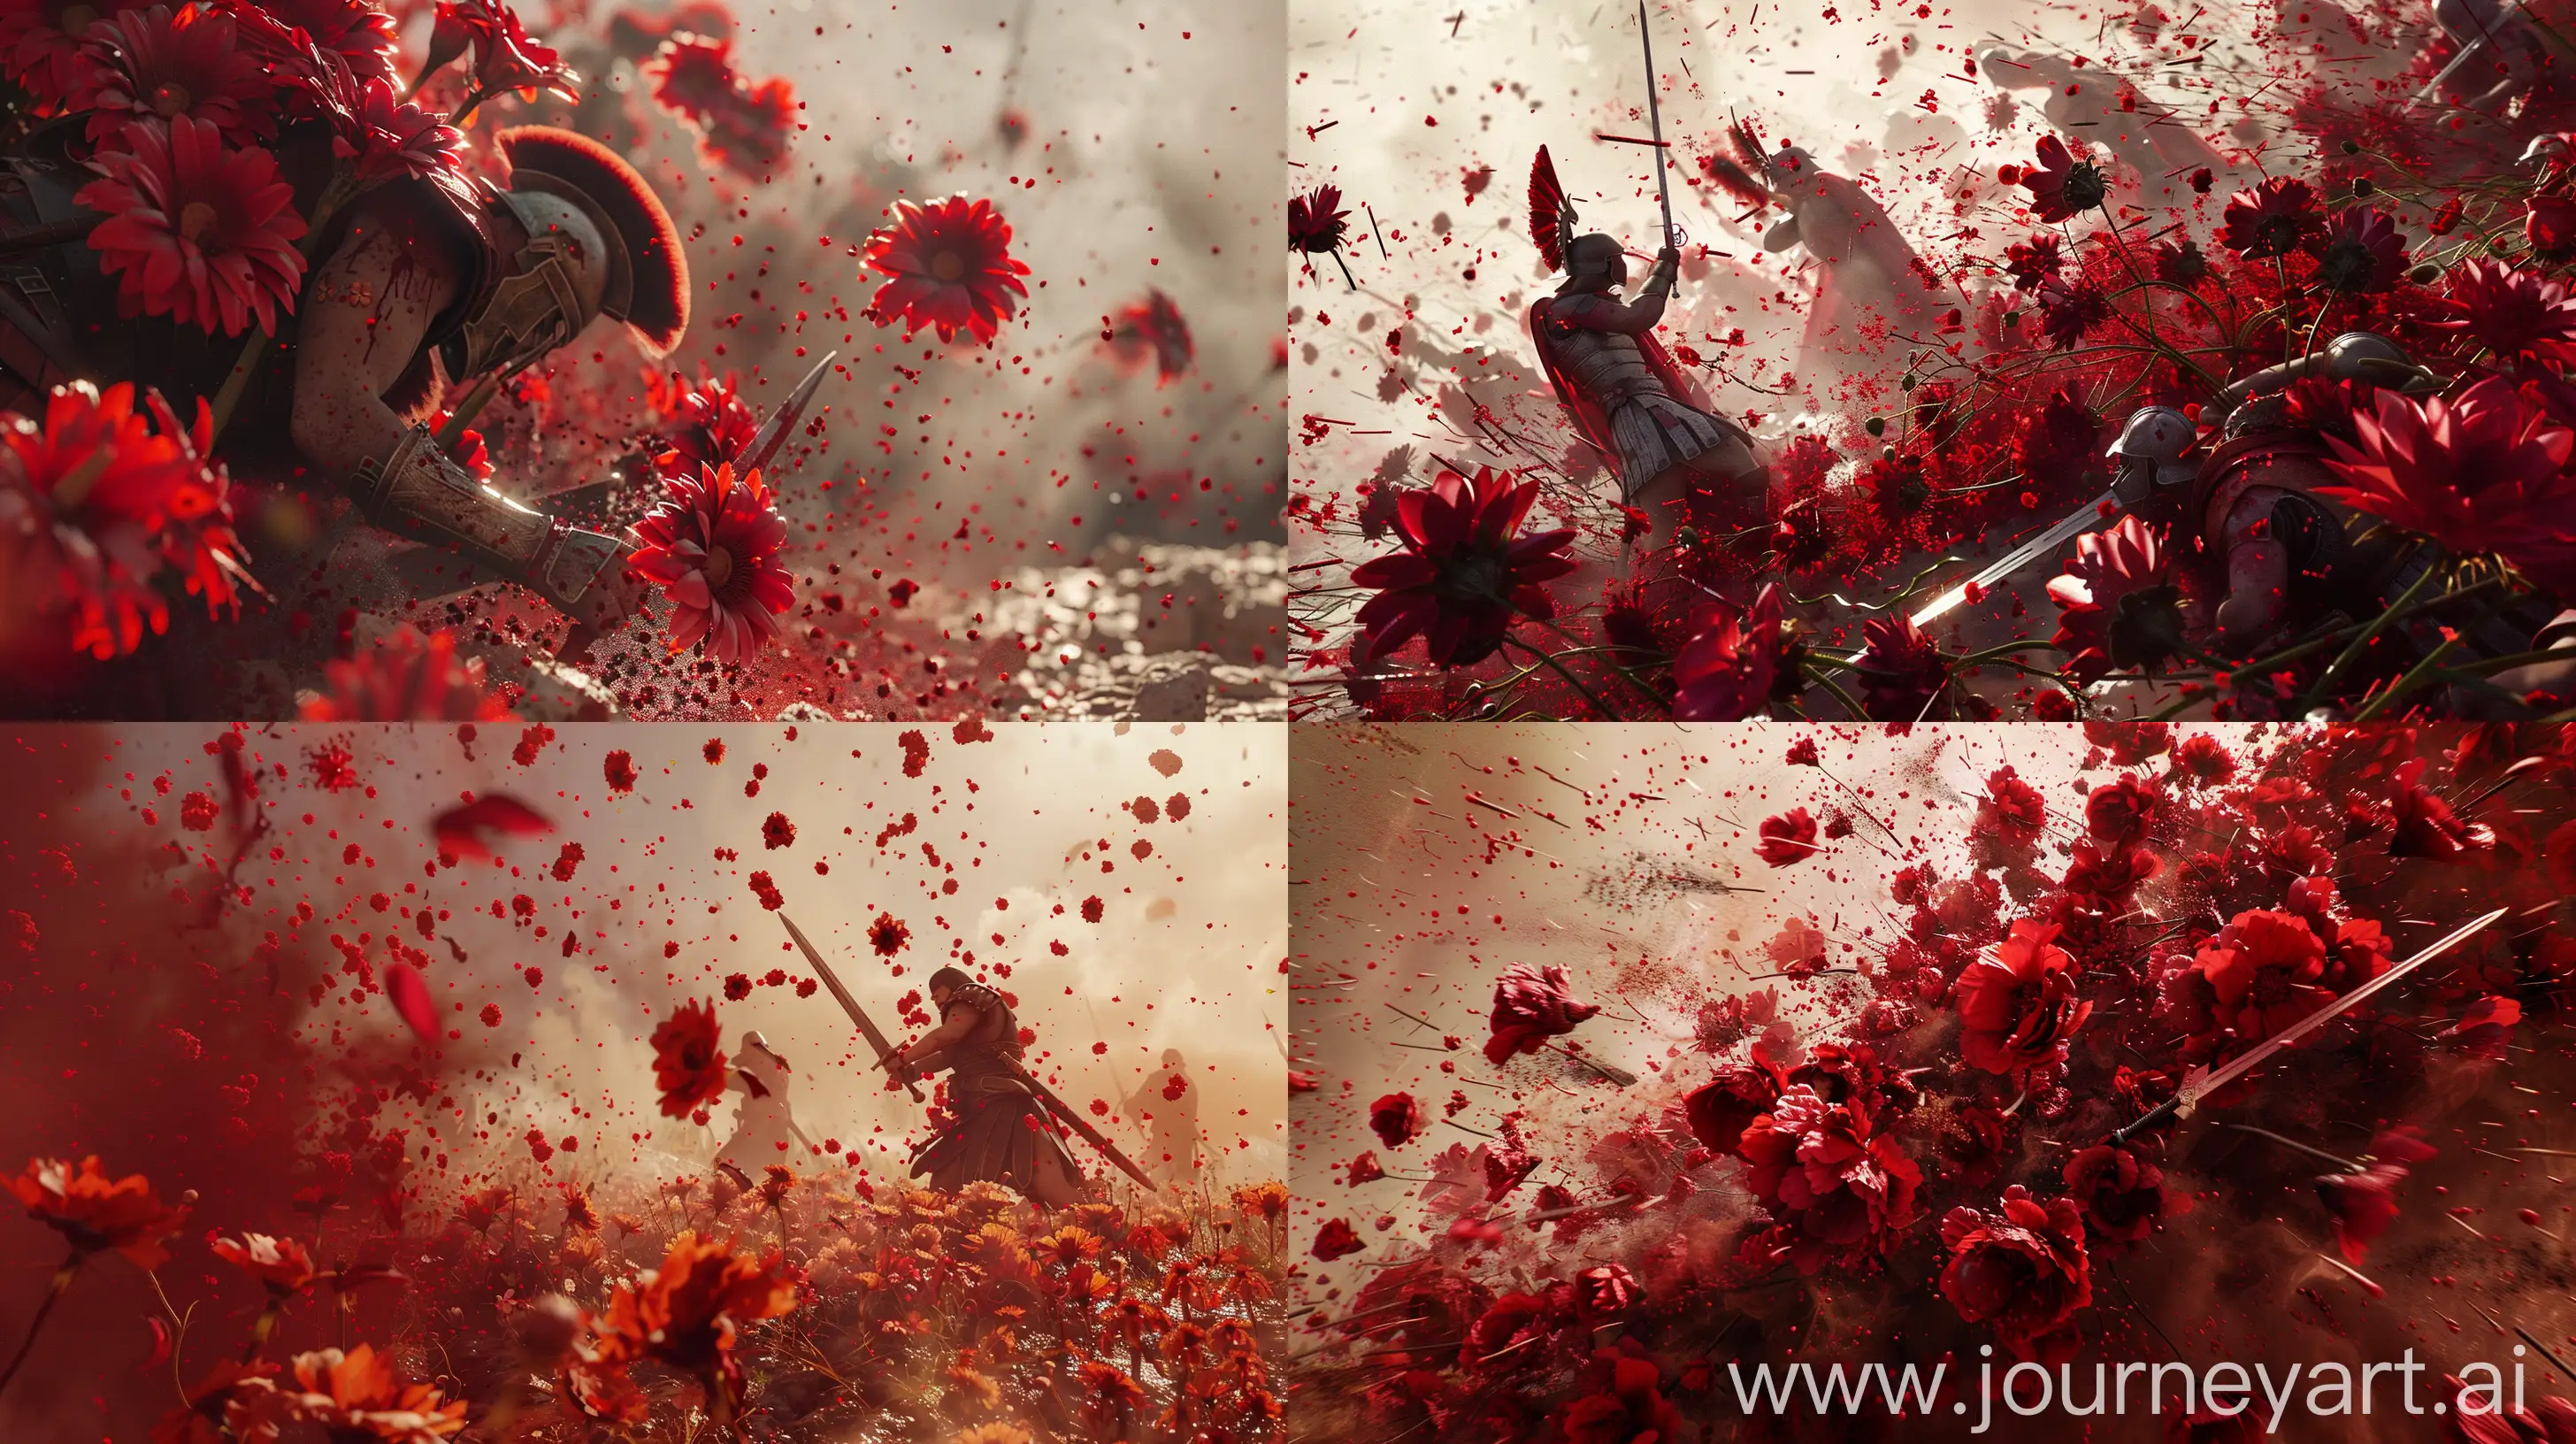 Epic-Gladiator-Battle-Surreal-Red-Morphing-Fragments